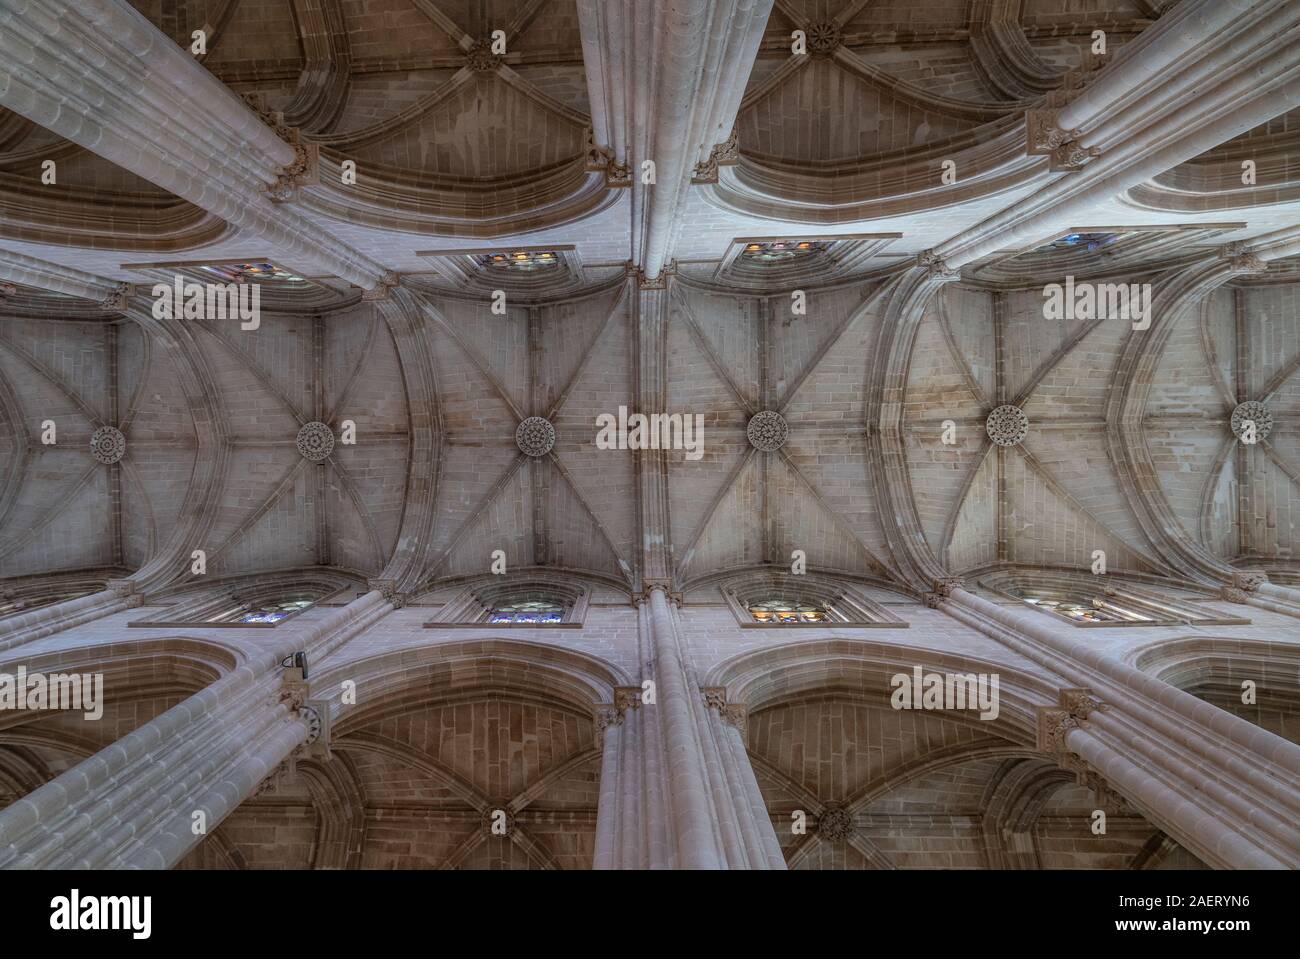 Majestic pointed arches, piers, triforium, clerestory, ribbed vaulting, navelancet opening in Batalha monastery a masterpiece of Portuguese Gothic Stock Photo